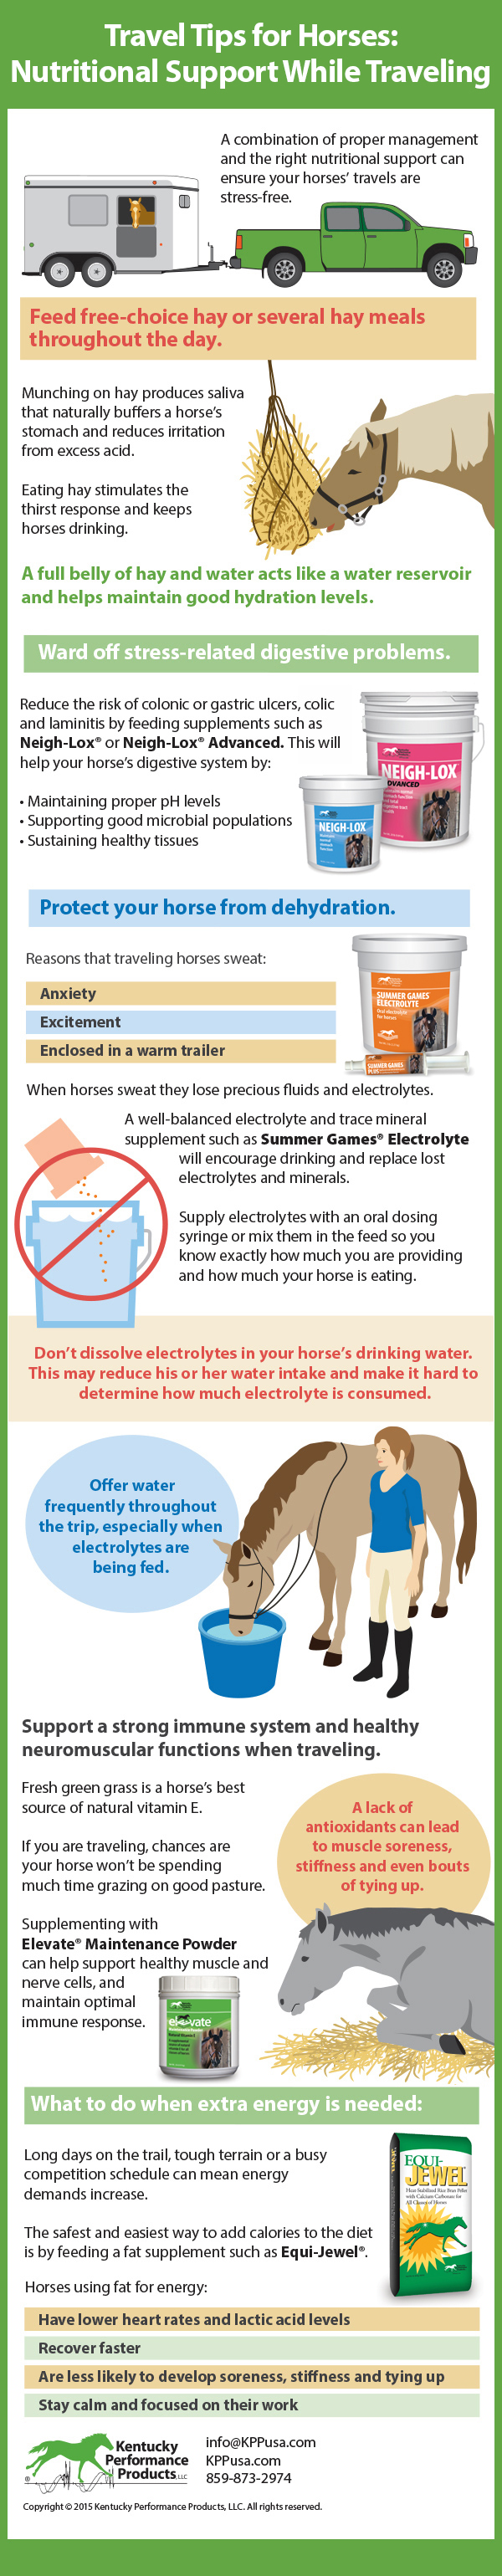 Travel-Tips-for-Horses-Part-2-Nutrional-Support-While-Traveling-15-174